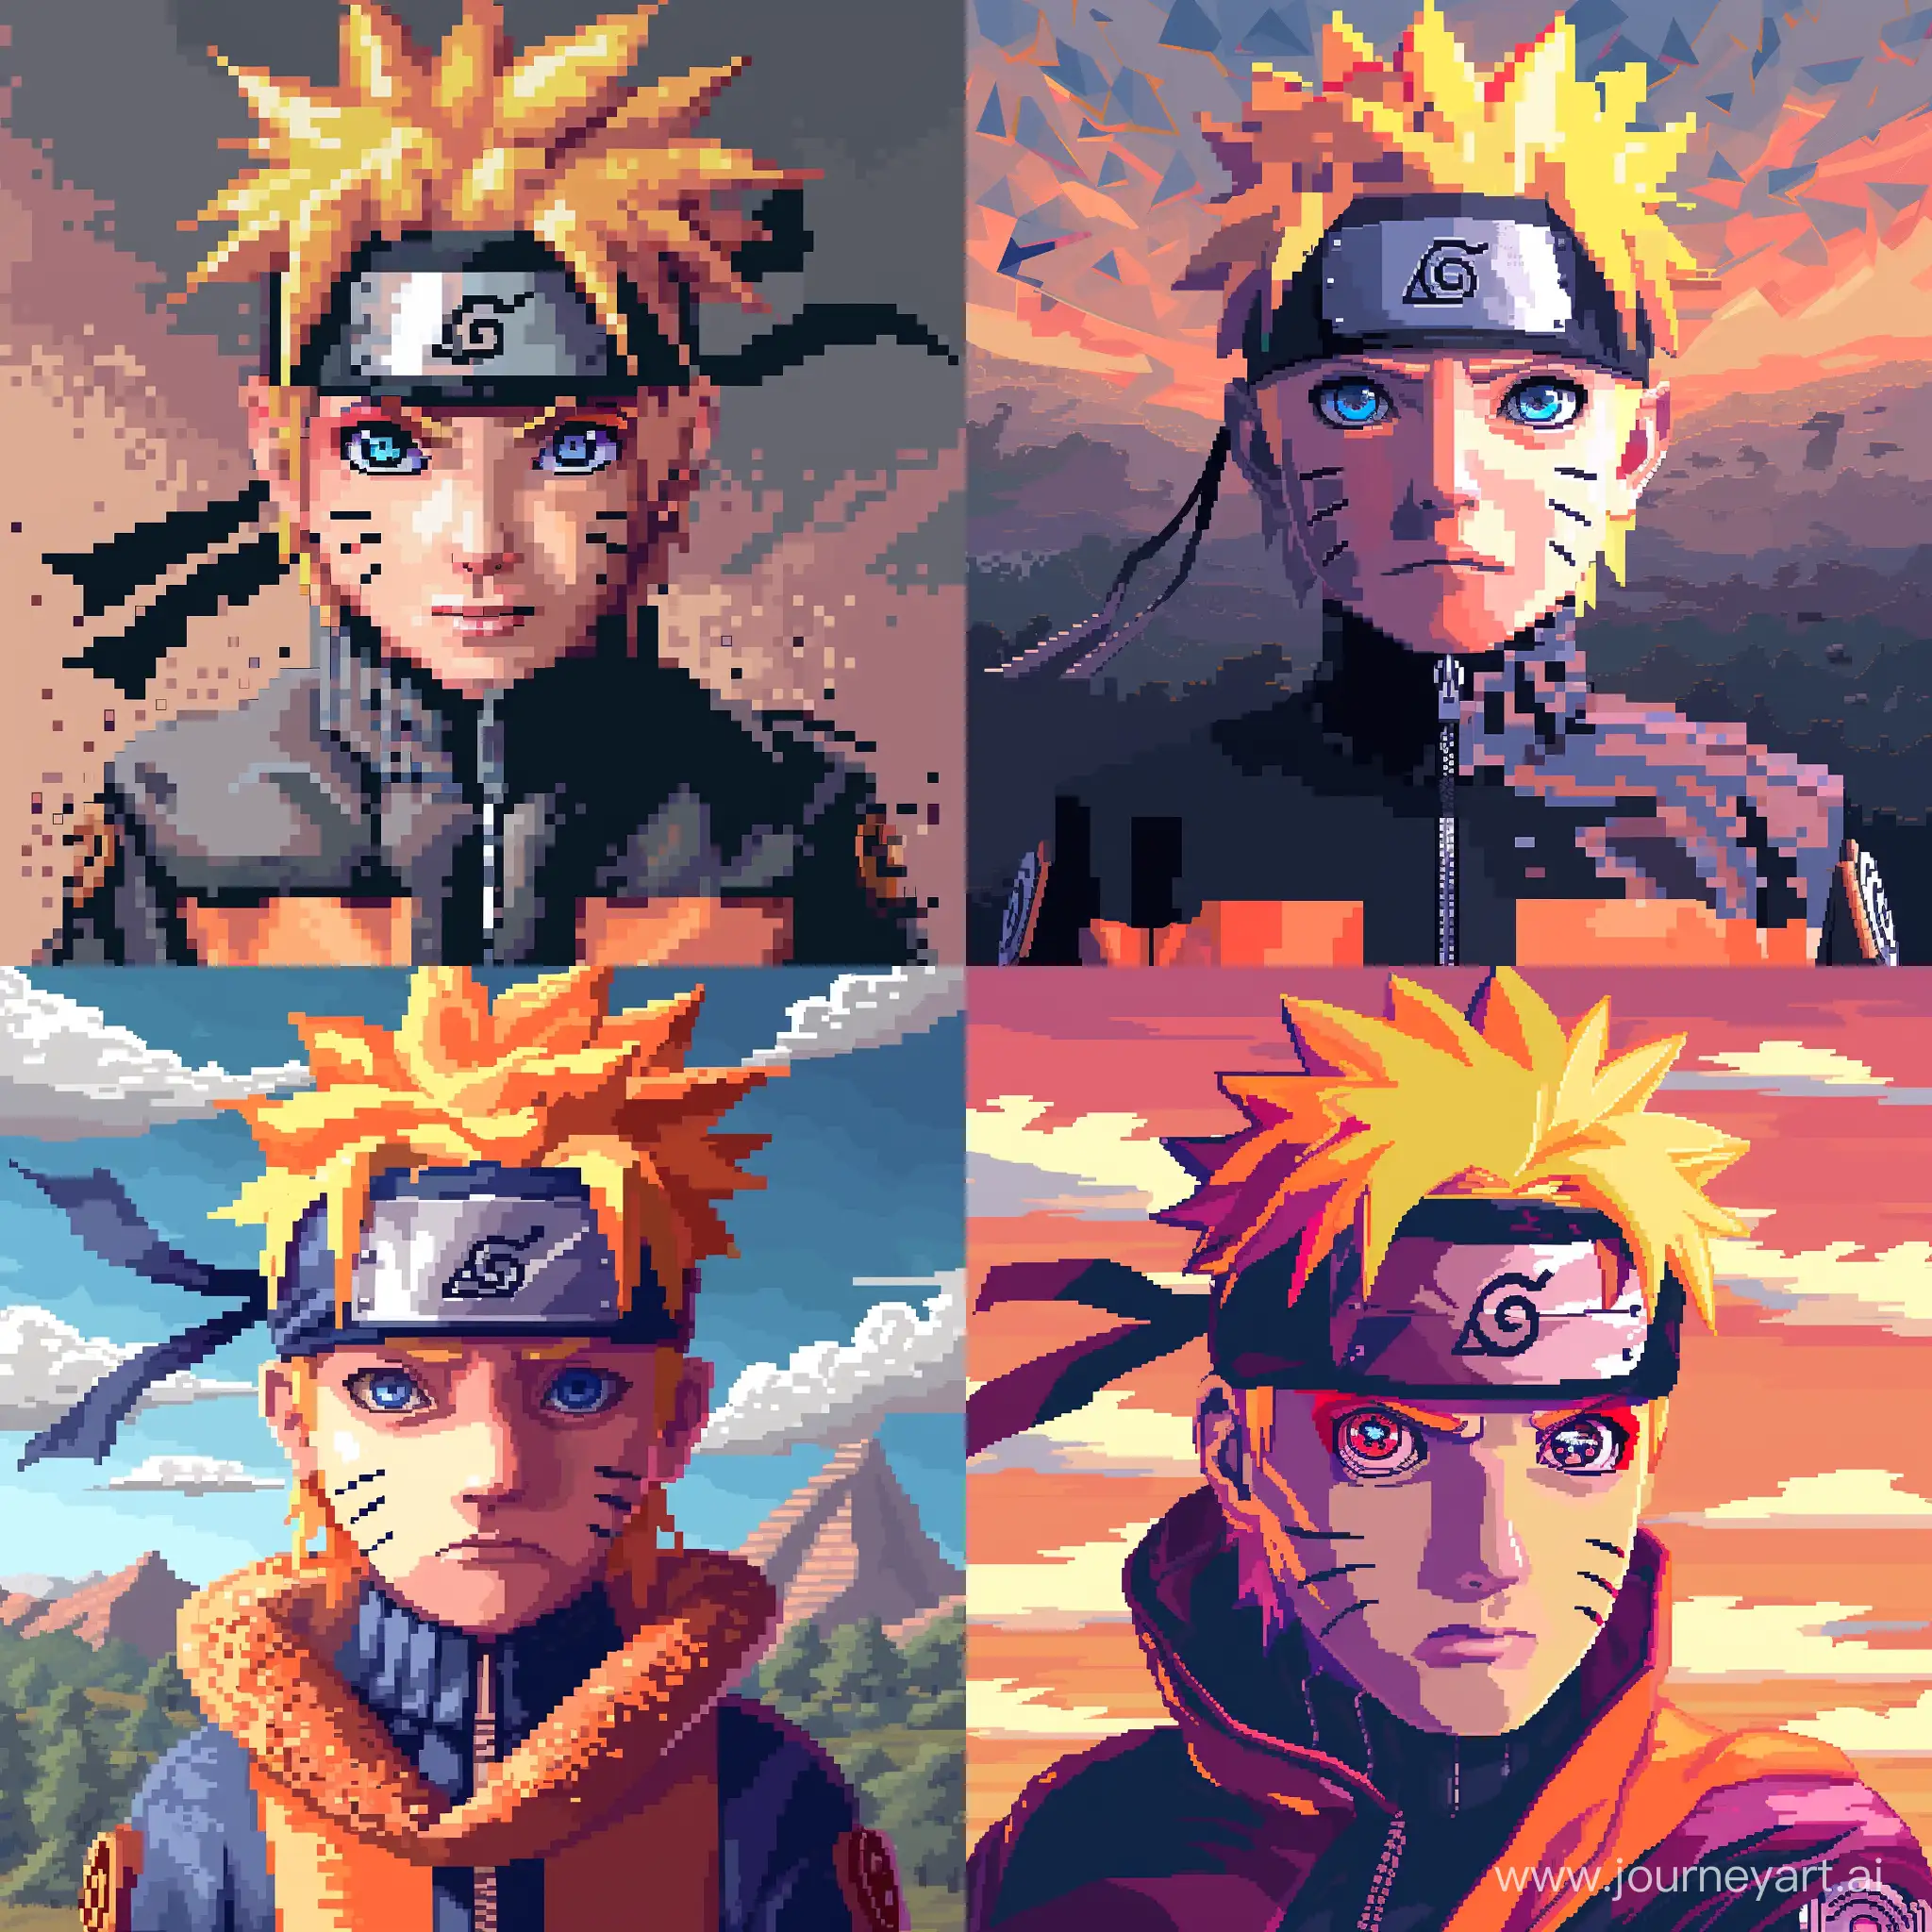 Pixel-Art-Portrait-of-Naruto-Shippuden-Characters-AnimeInspired-Pixel-Art-Depicting-Iconic-Naruto-Characters